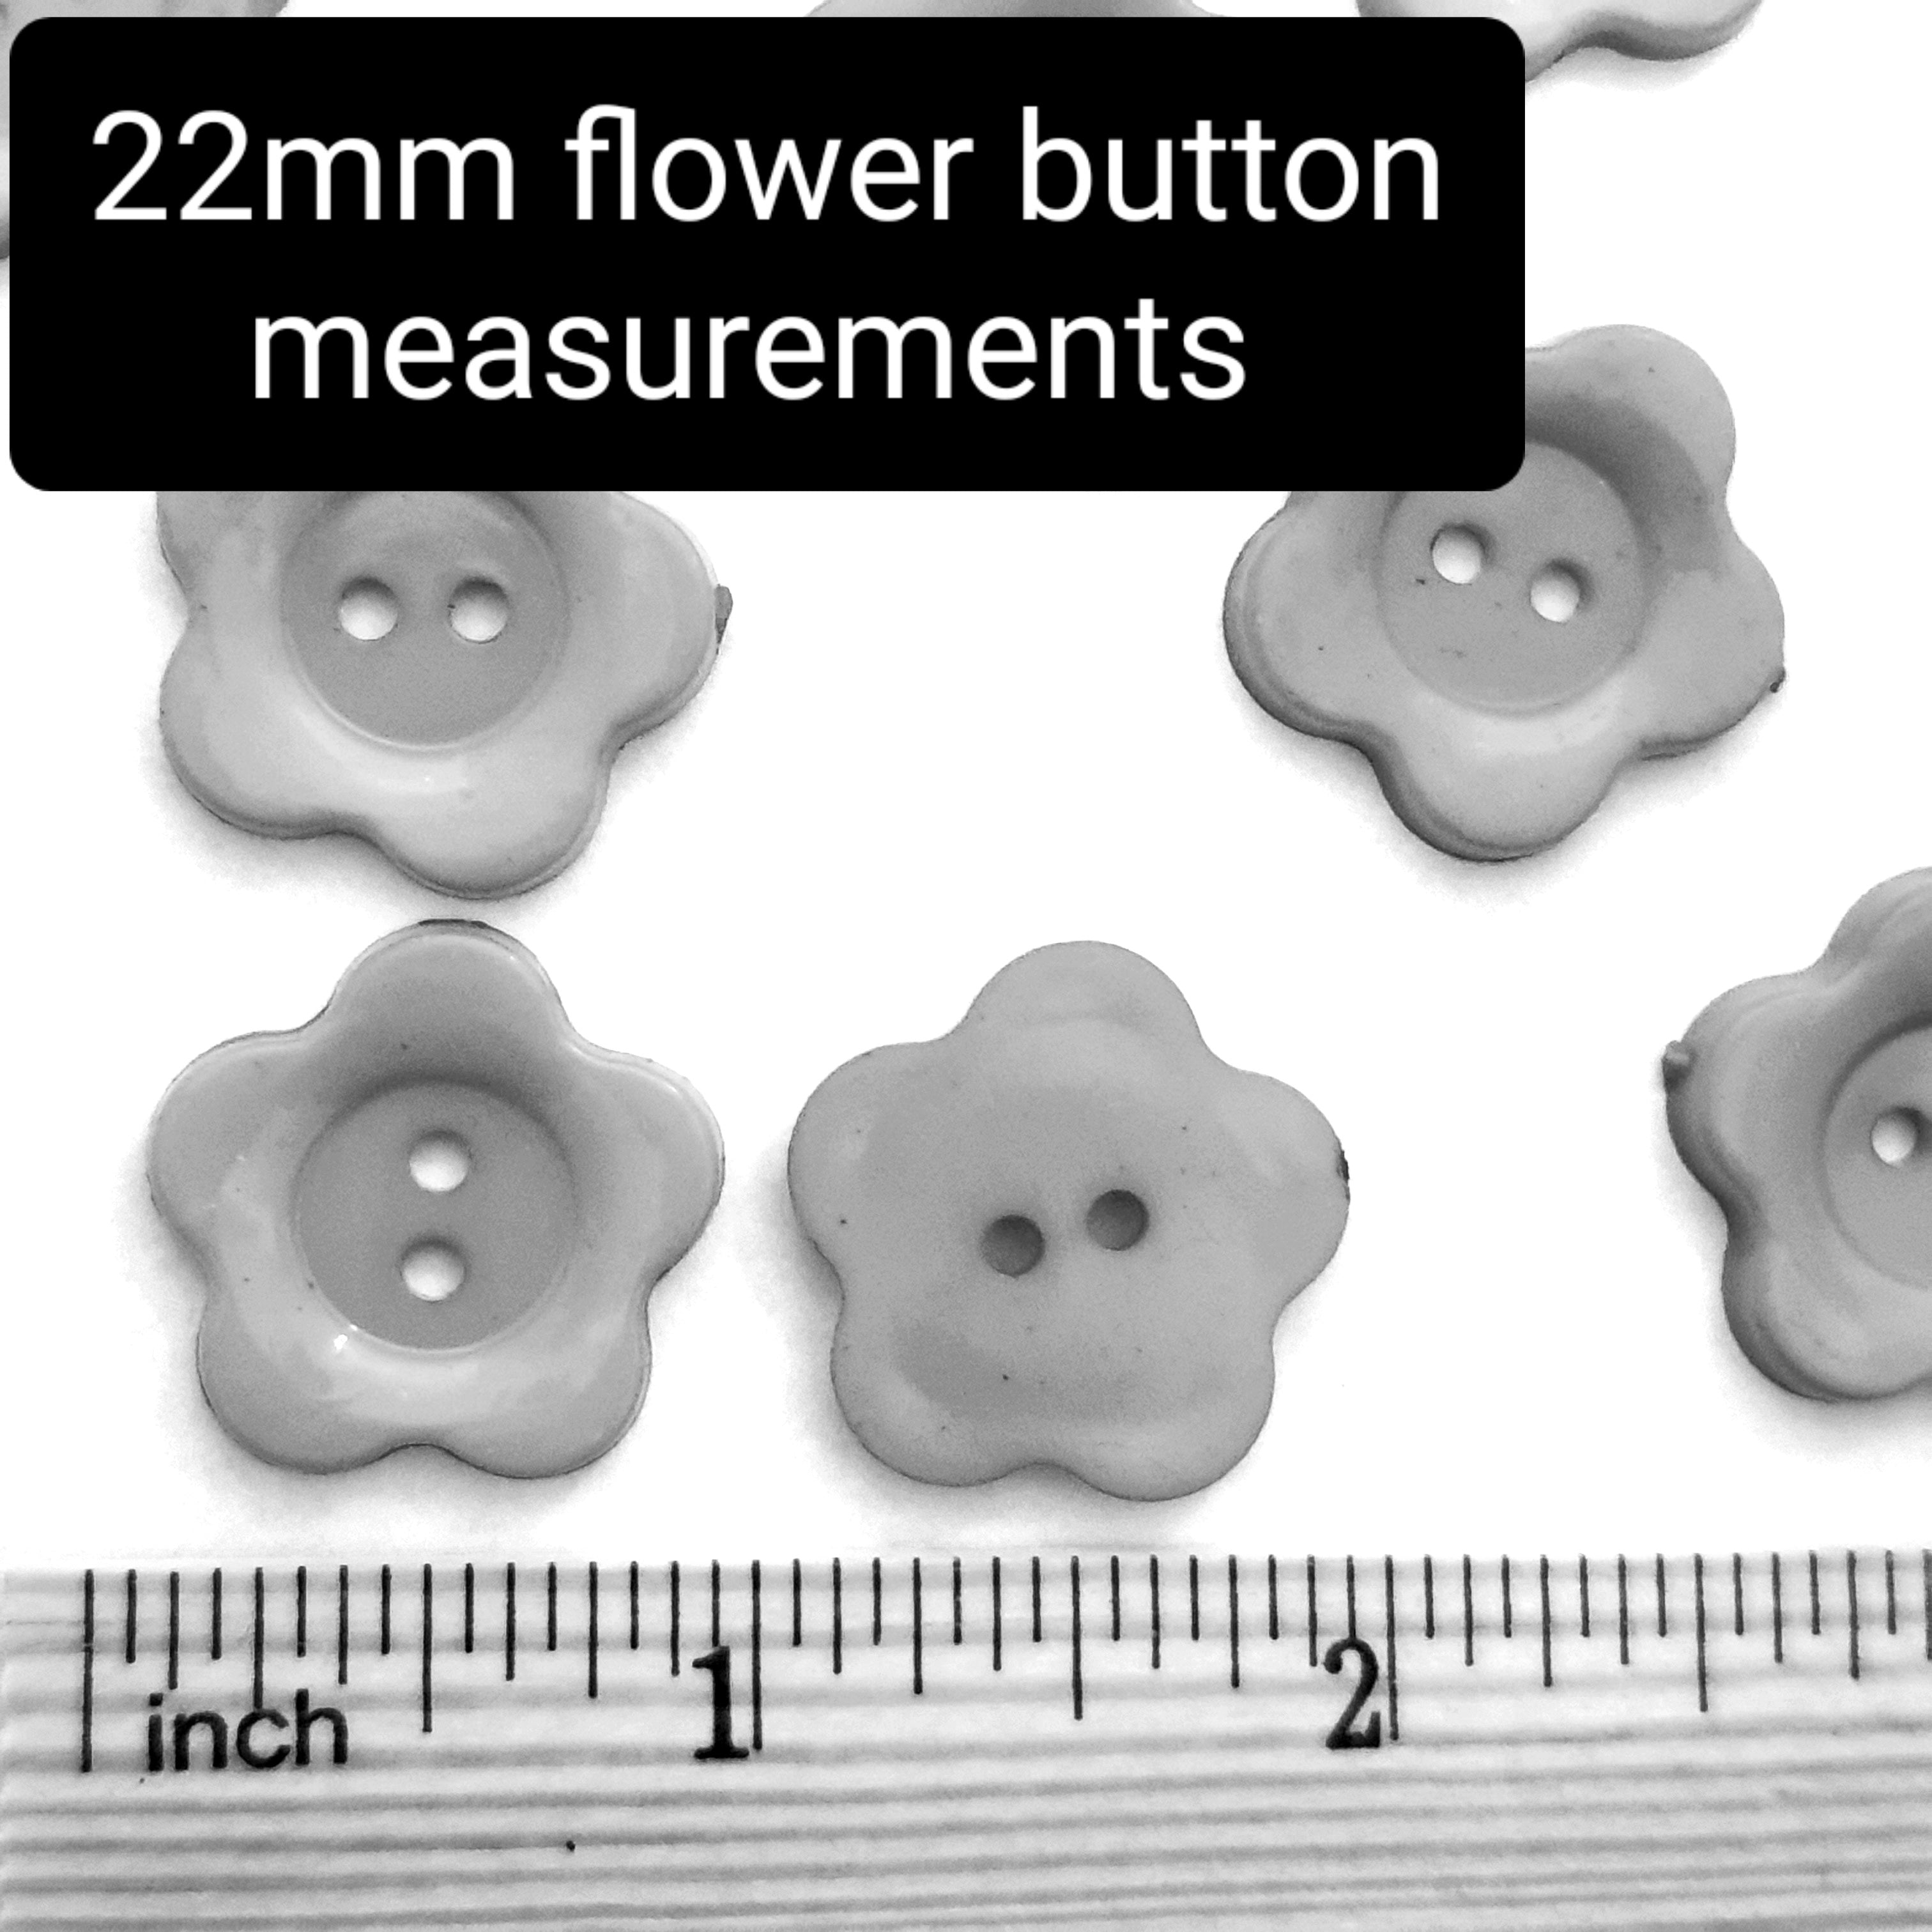 MajorCrafts 34pcs 22mm Hot Pink Flower Shaped 2 Holes Resin Sew-on Buttons